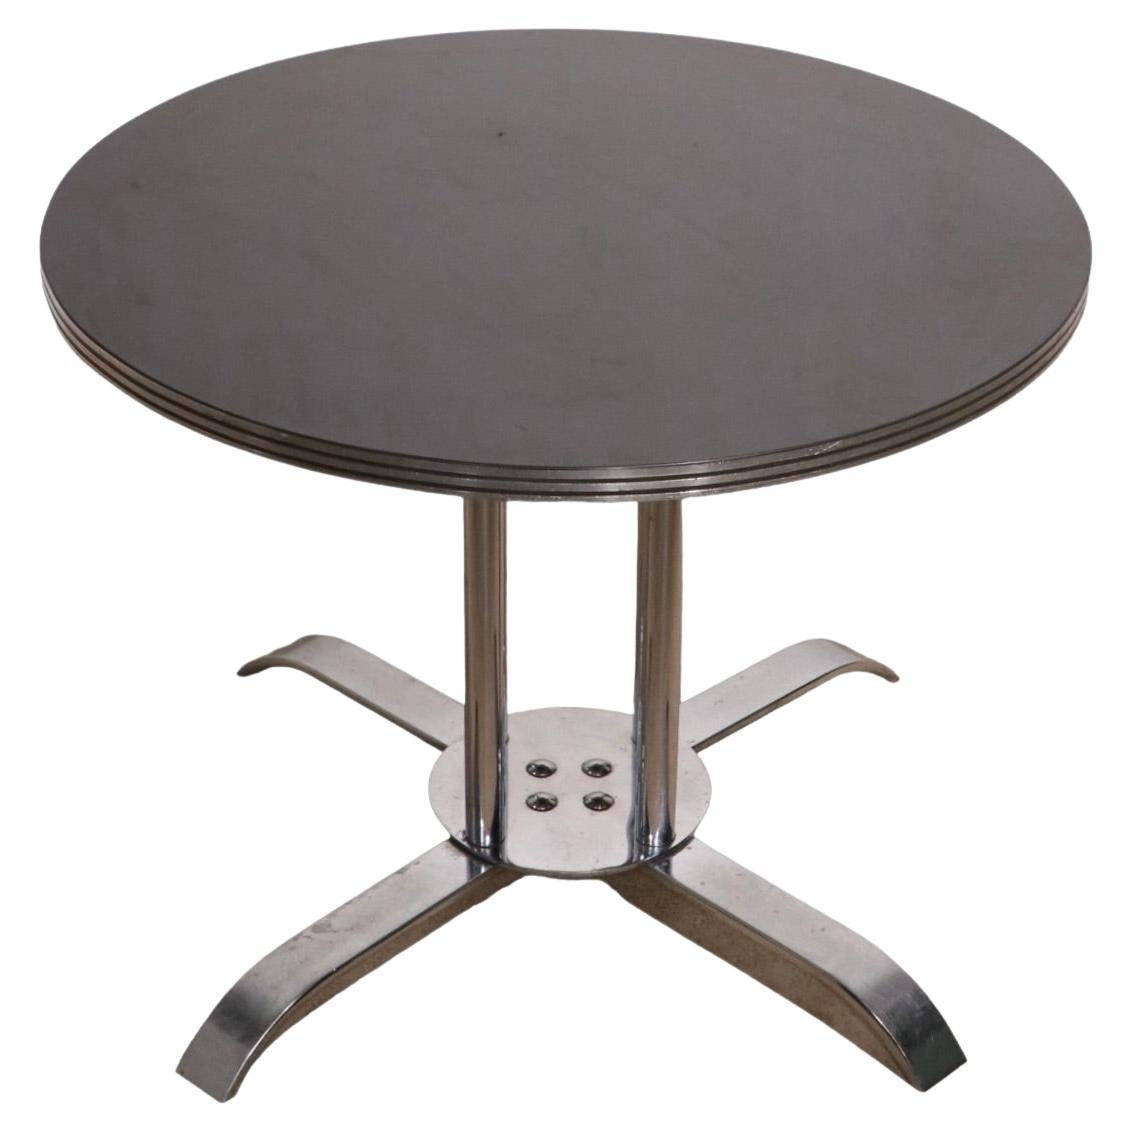 Art Deco Machine Age Chrome Table by McKay Craft Furniture Made in USA c 1930's For Sale